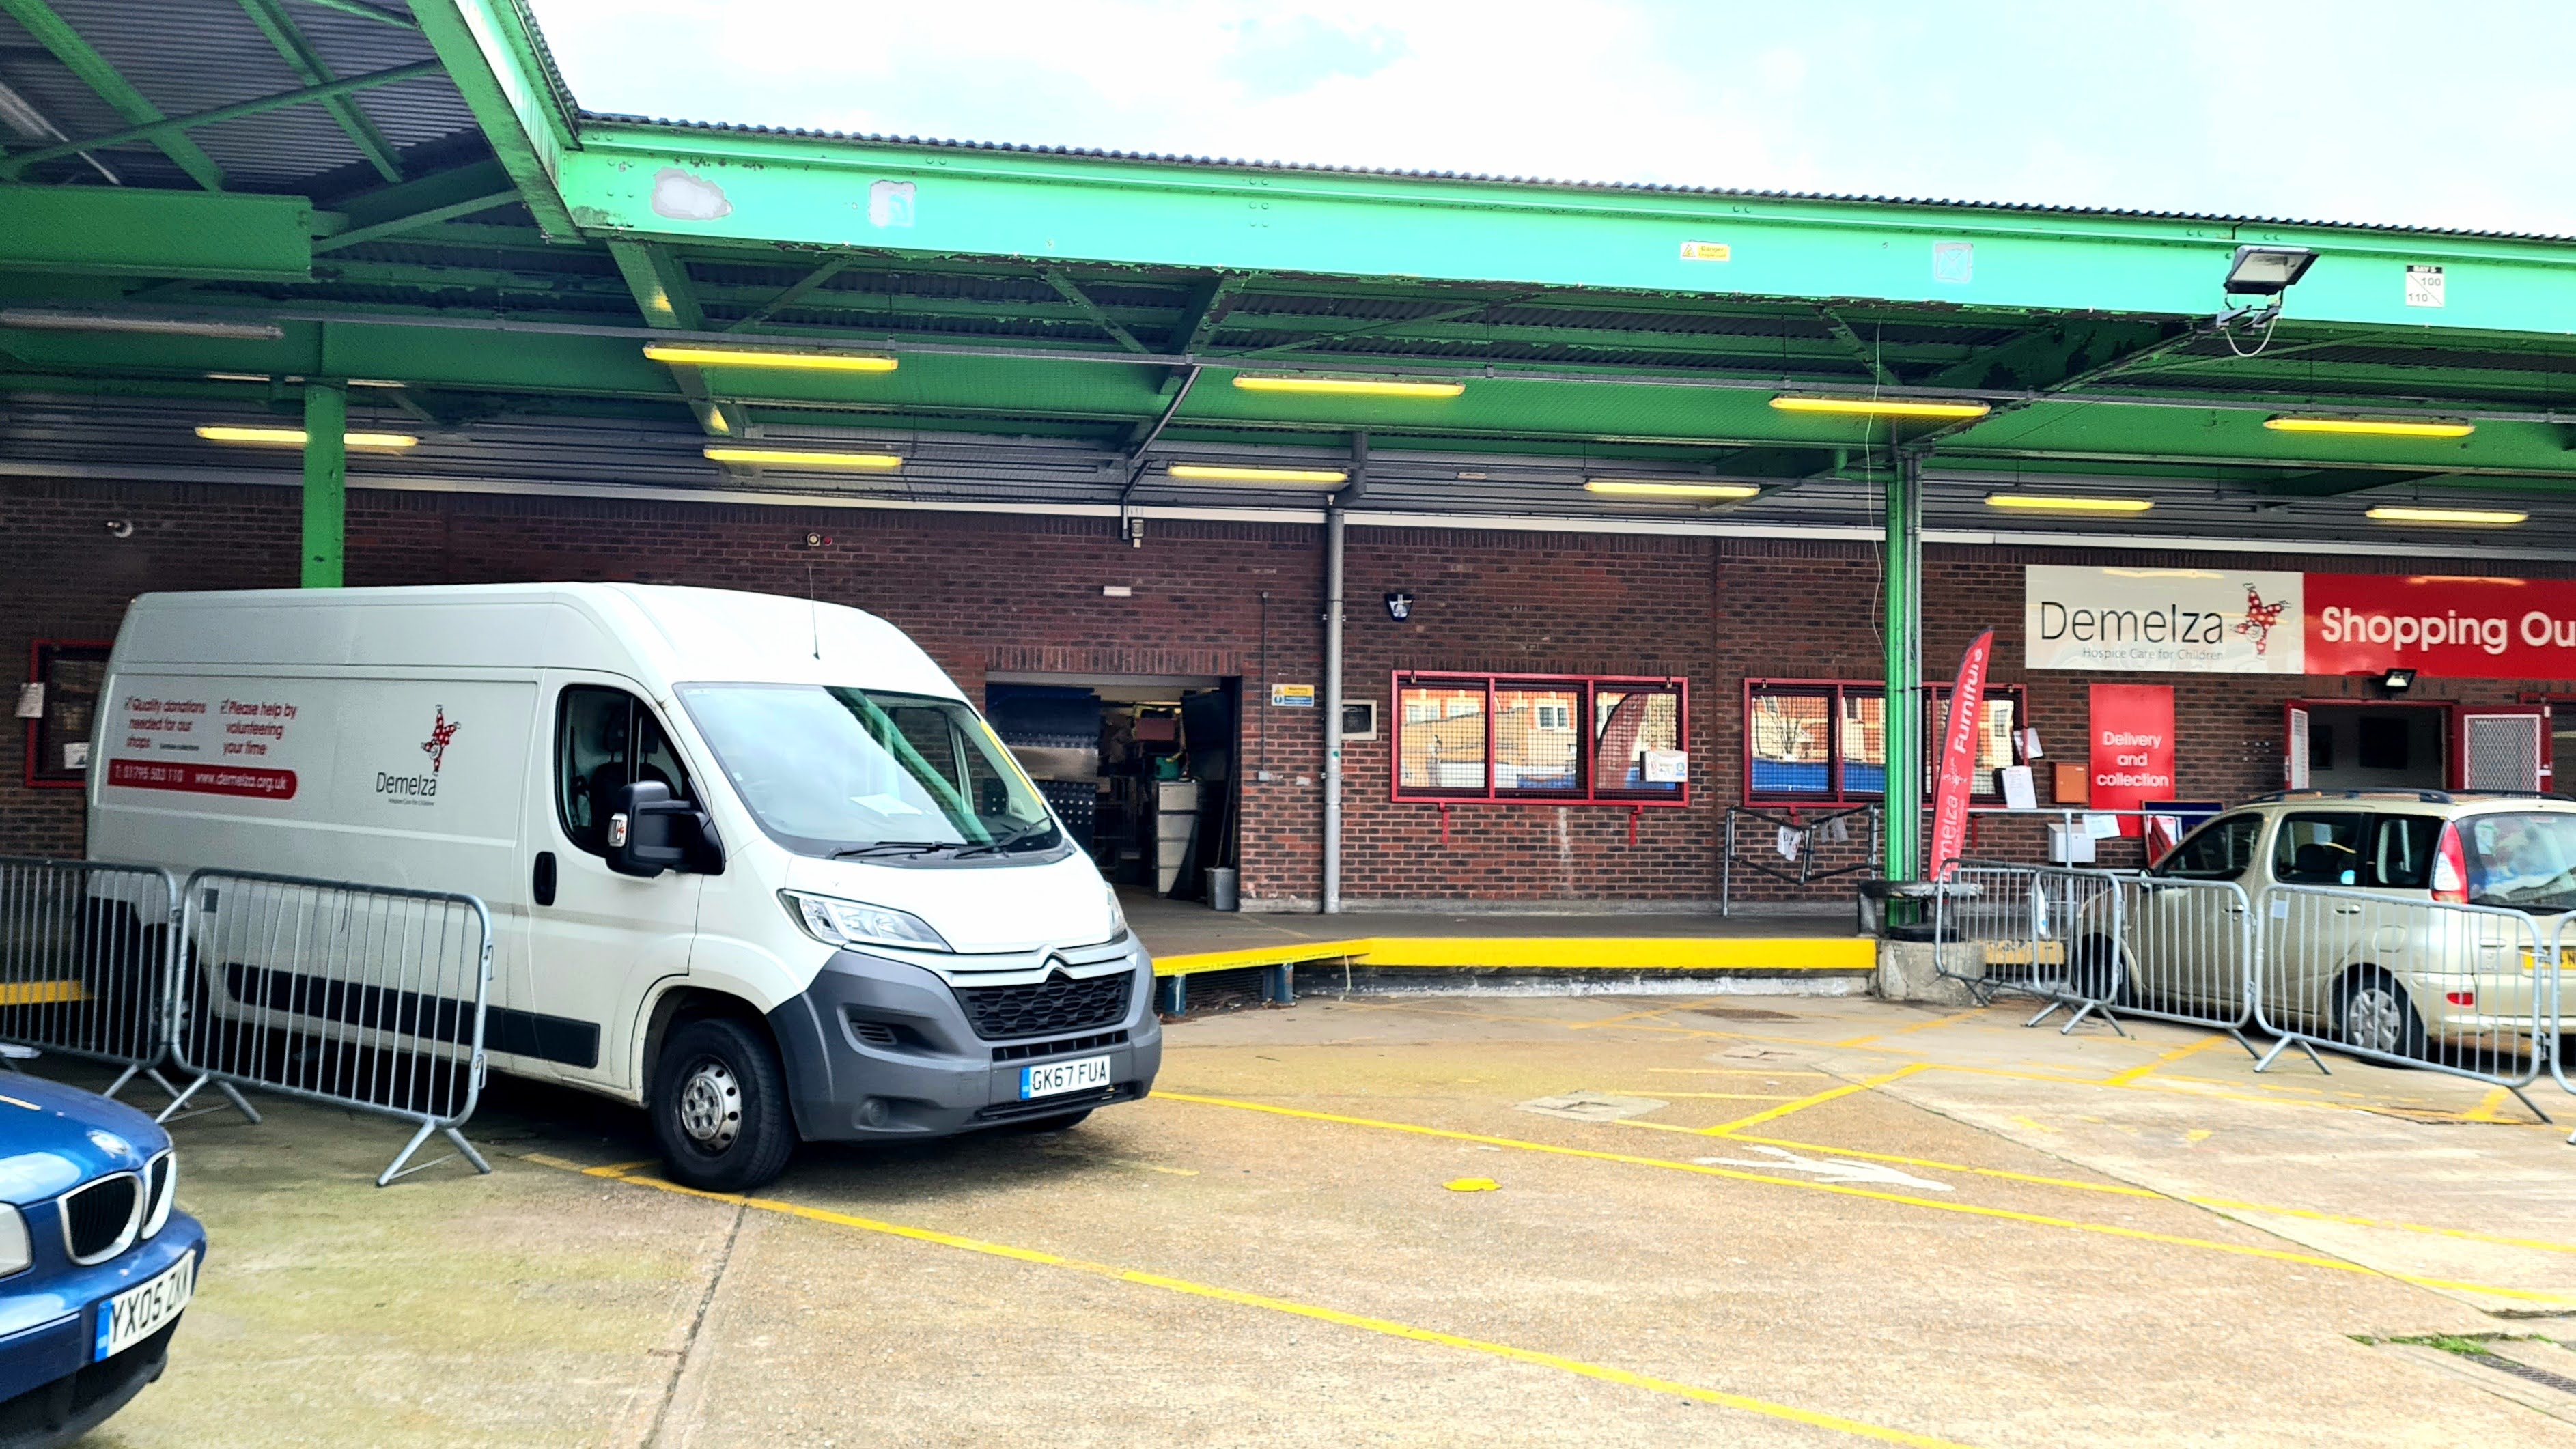 A Demelza van is parked up in the loading bay of the Maidstone Distribution Centre.